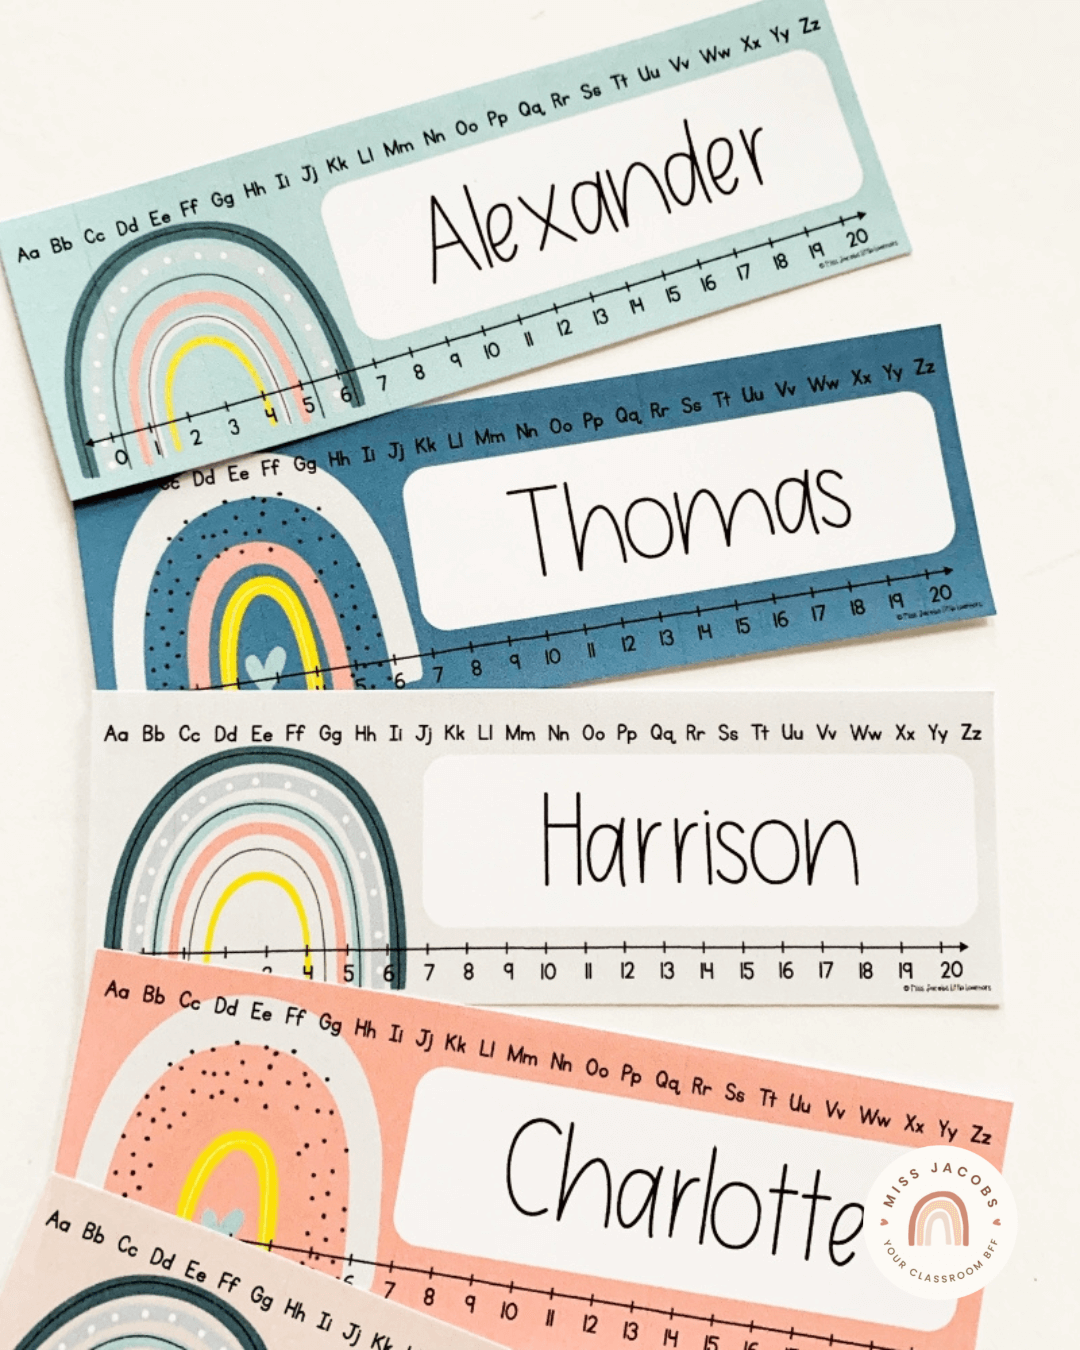 The left image shows a door display from the Modern Rainbow range. The central poster says ‘We are a rainbow of possibilities with circular name labels surrounding it. They feature decorative rainbow illustrations in muted rainbow colours. On the right, name labels from the same range feature the names Alexander, Thomas, Harrison and Charlotte. They’re in mint, navy, grey and peach colourways.